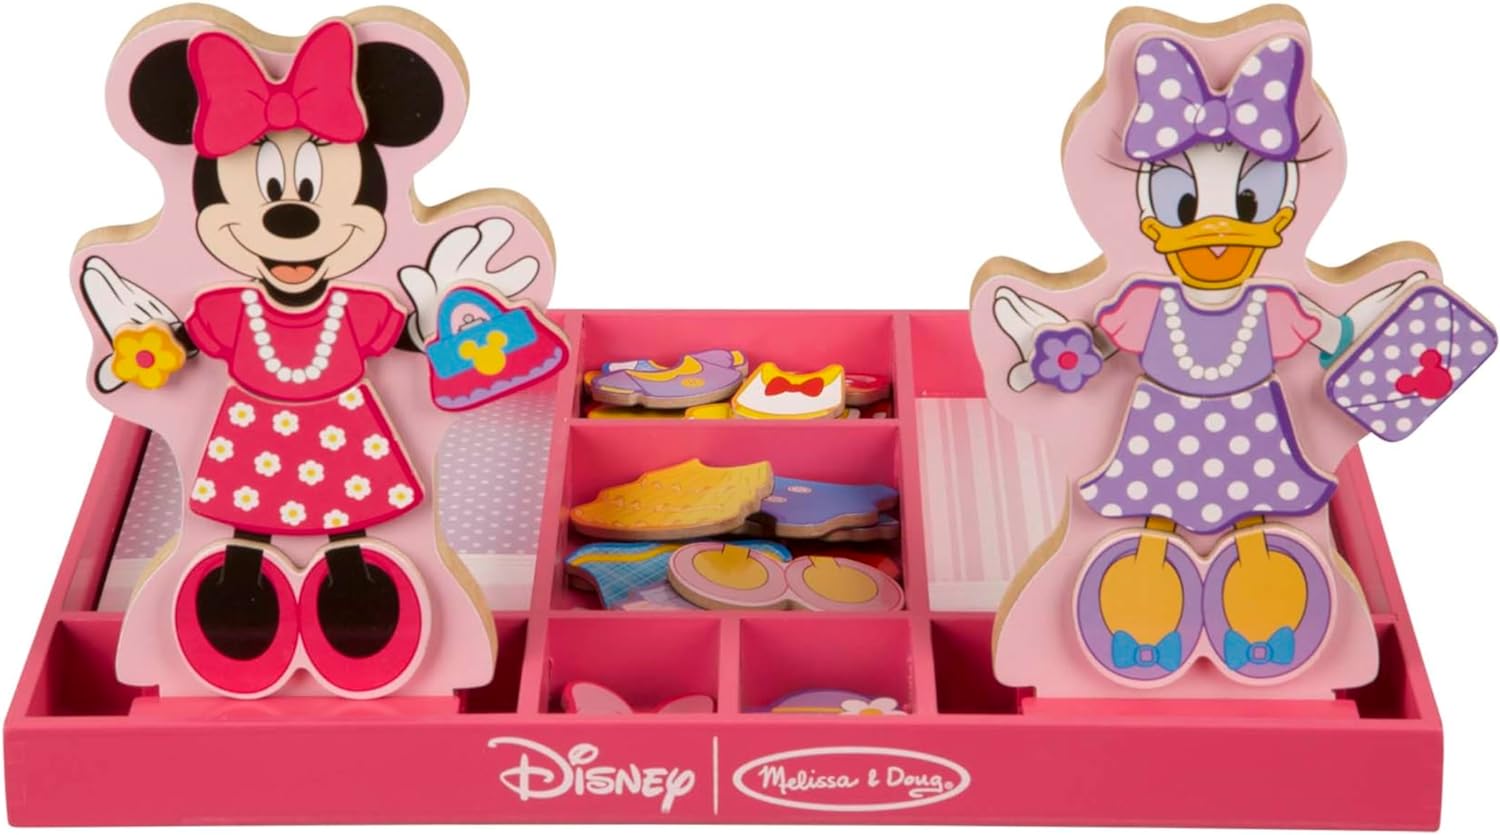 Melissa & Doug Disney Minnie Mouse and Daisy Duck Magnetic Dress-Up Wooden Doll Pretend Play Set (40+ pcs) - Toys, Dress Up Dolls For Preschoolers And Kids Ages 3+